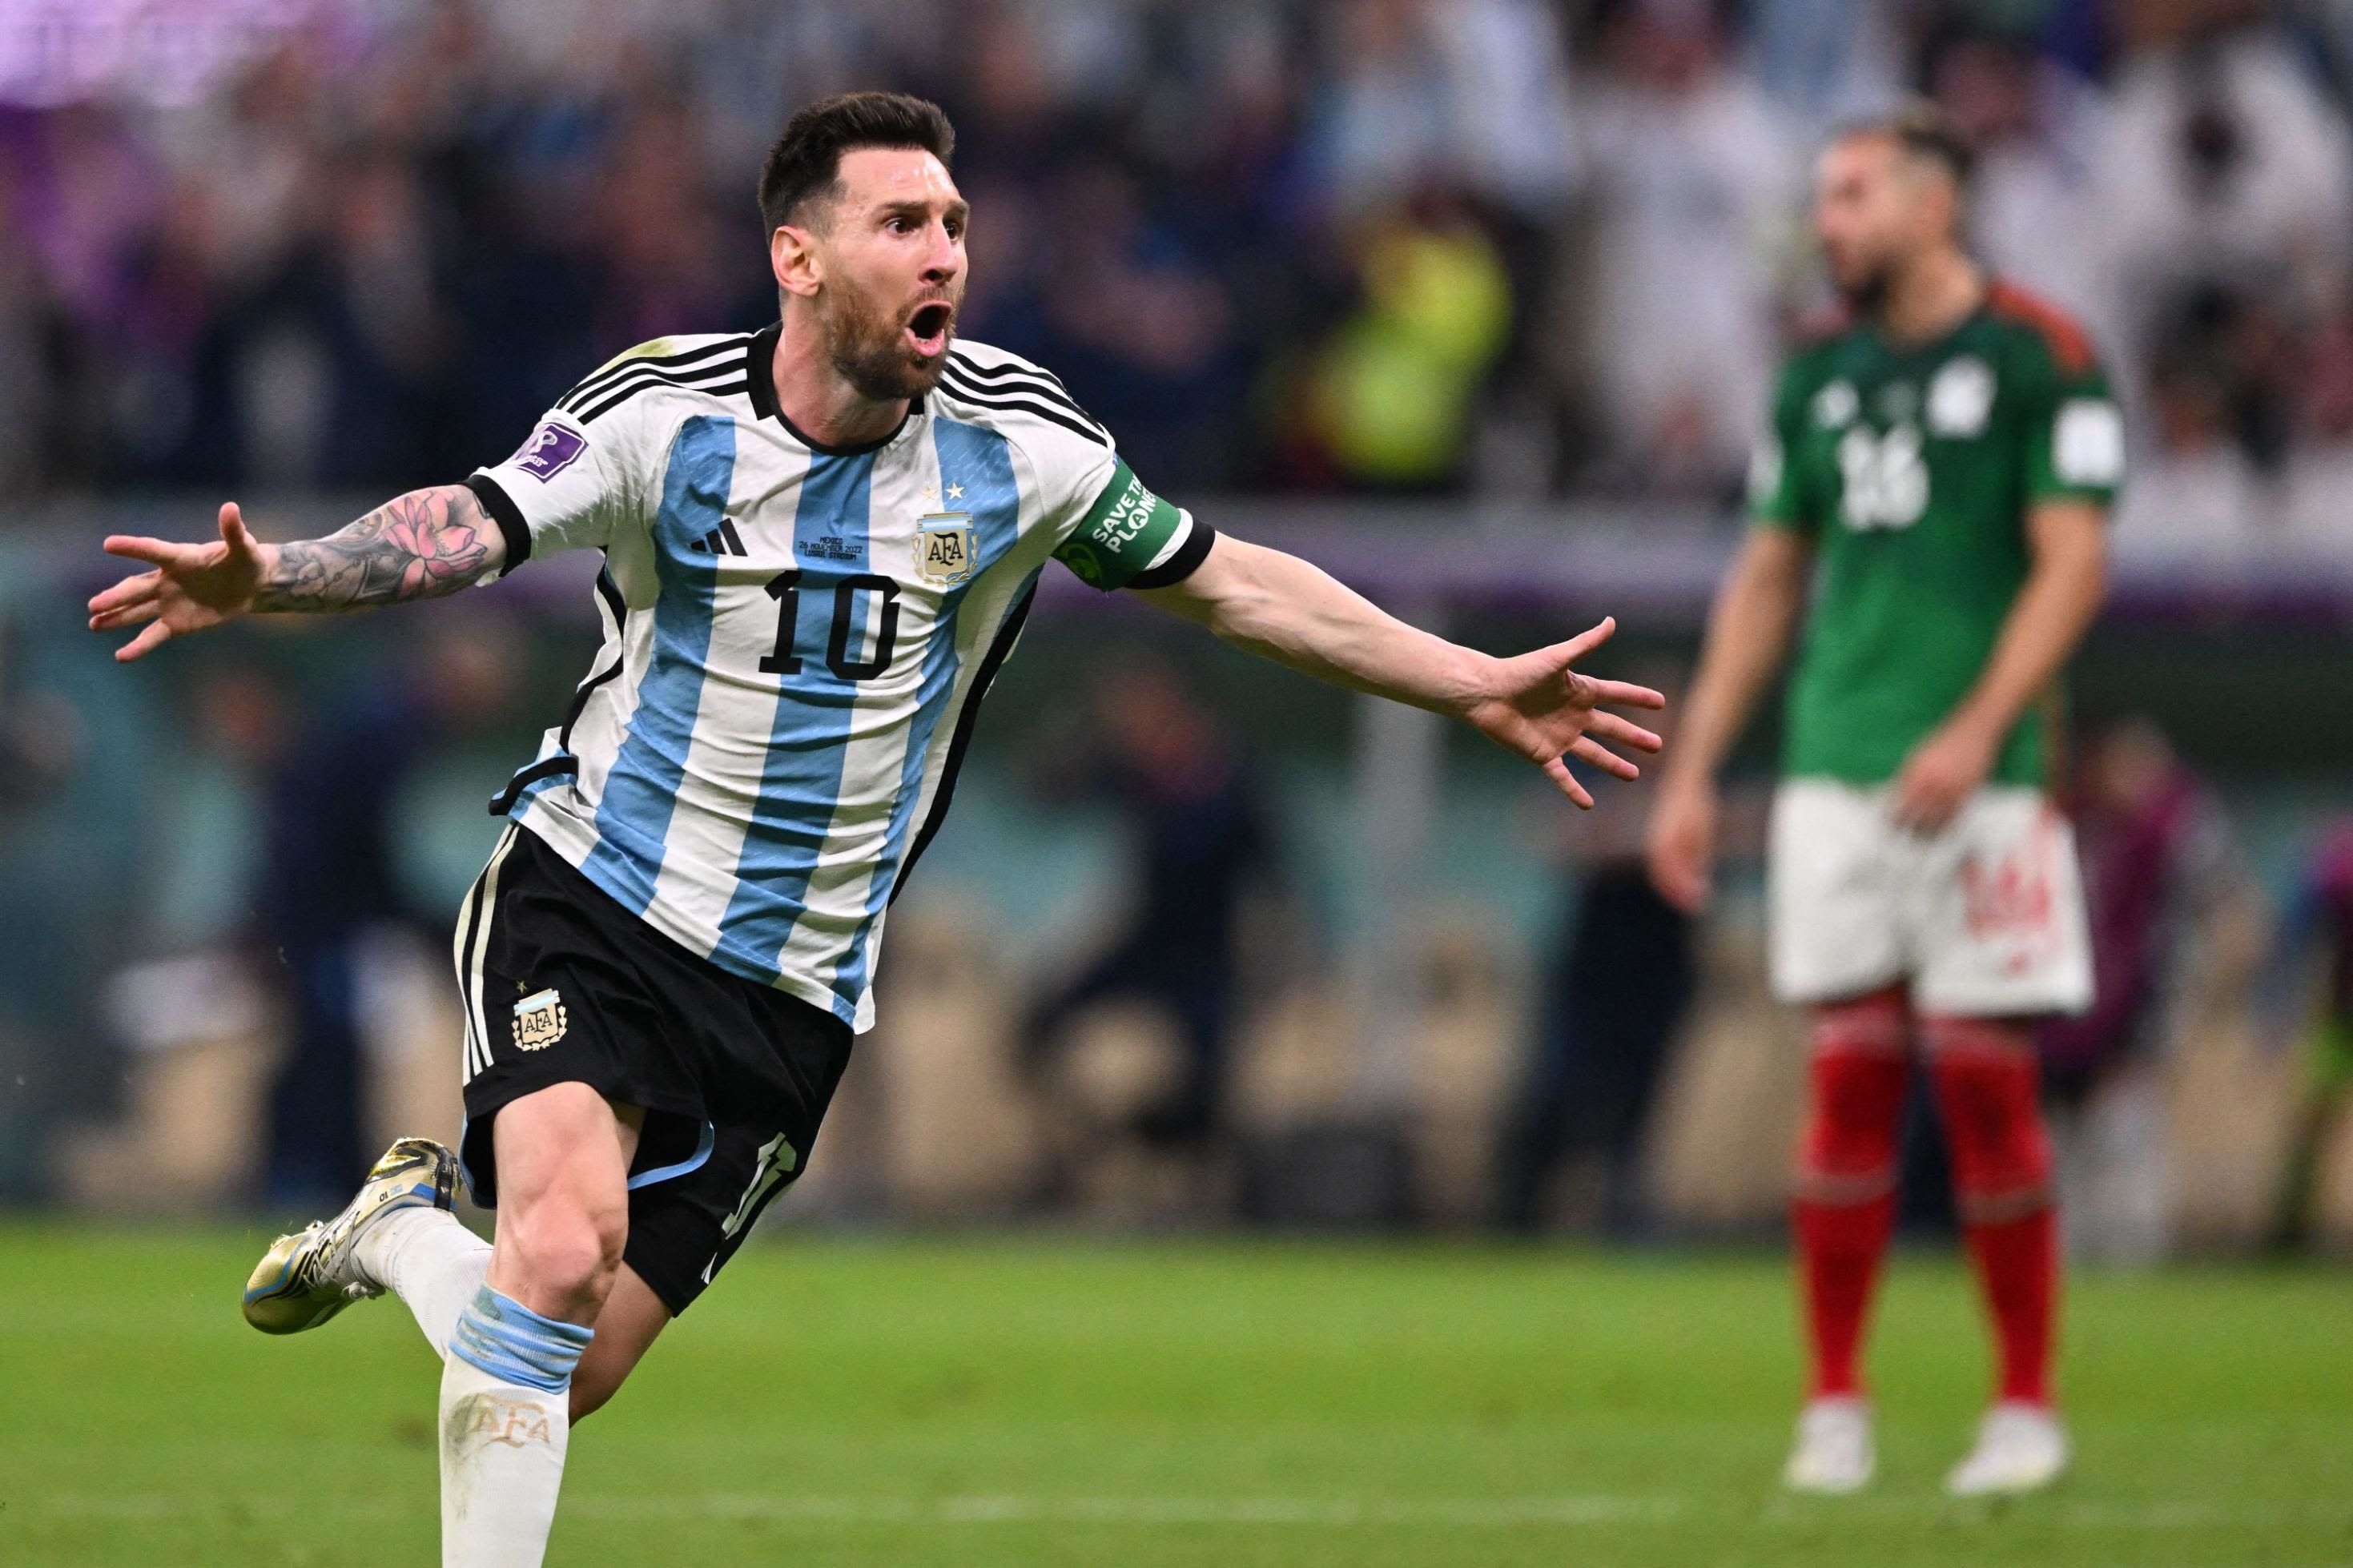 Koeman calls Messi the best player in the world, capable of changing the result in a second